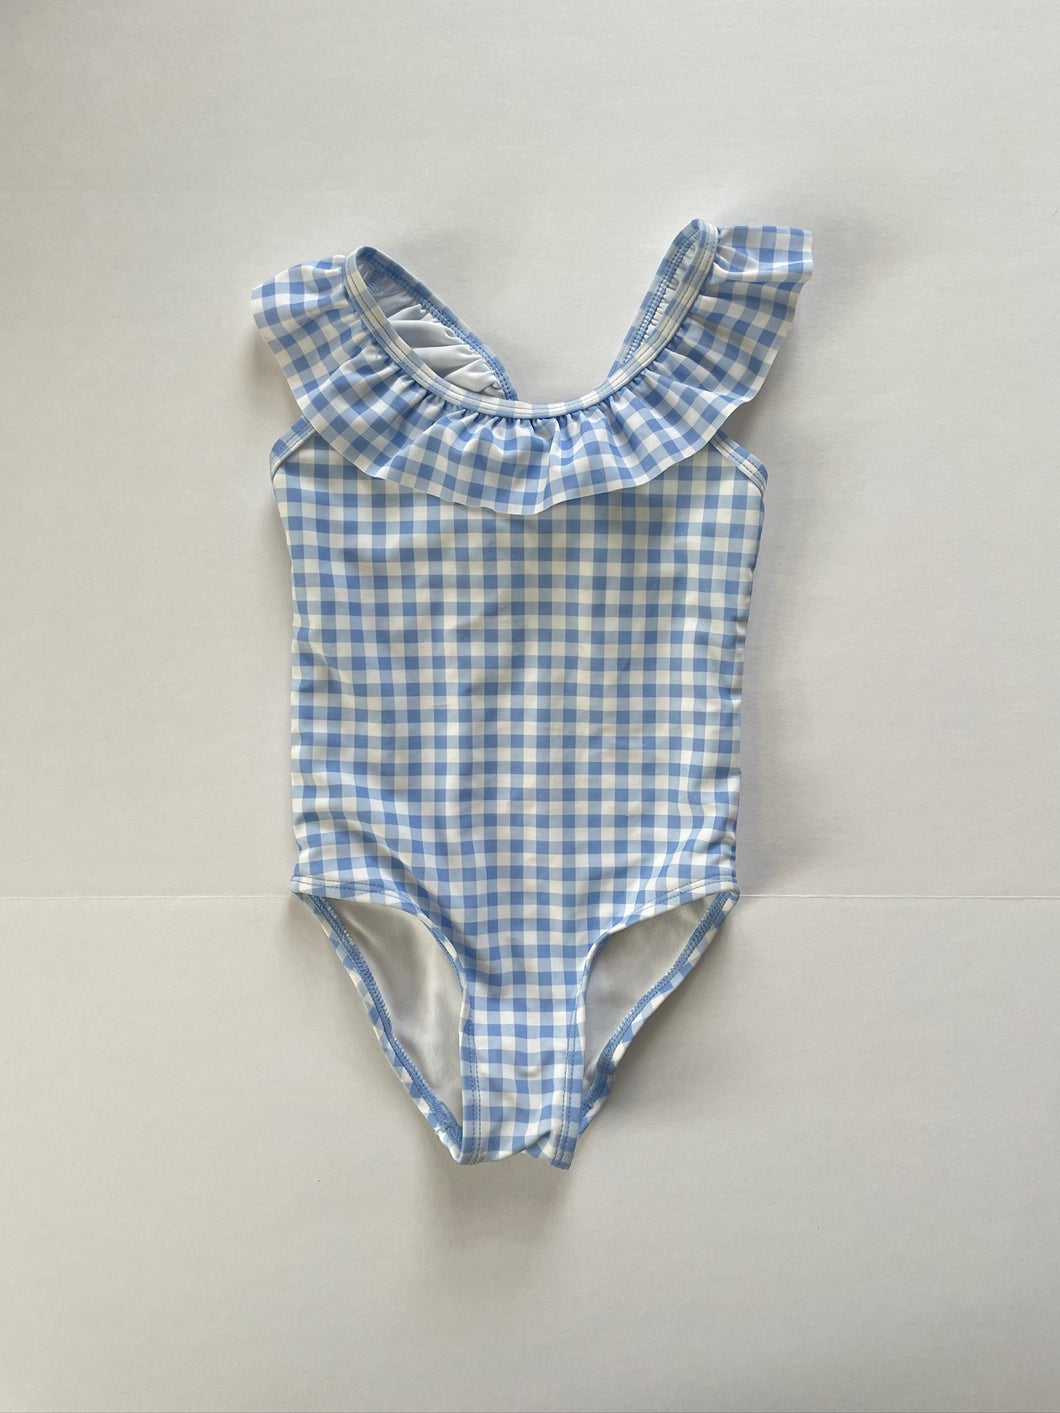 Carter's Just One You - Toddler Girls Blue Gingham Ruffle Bathing Suit 2T